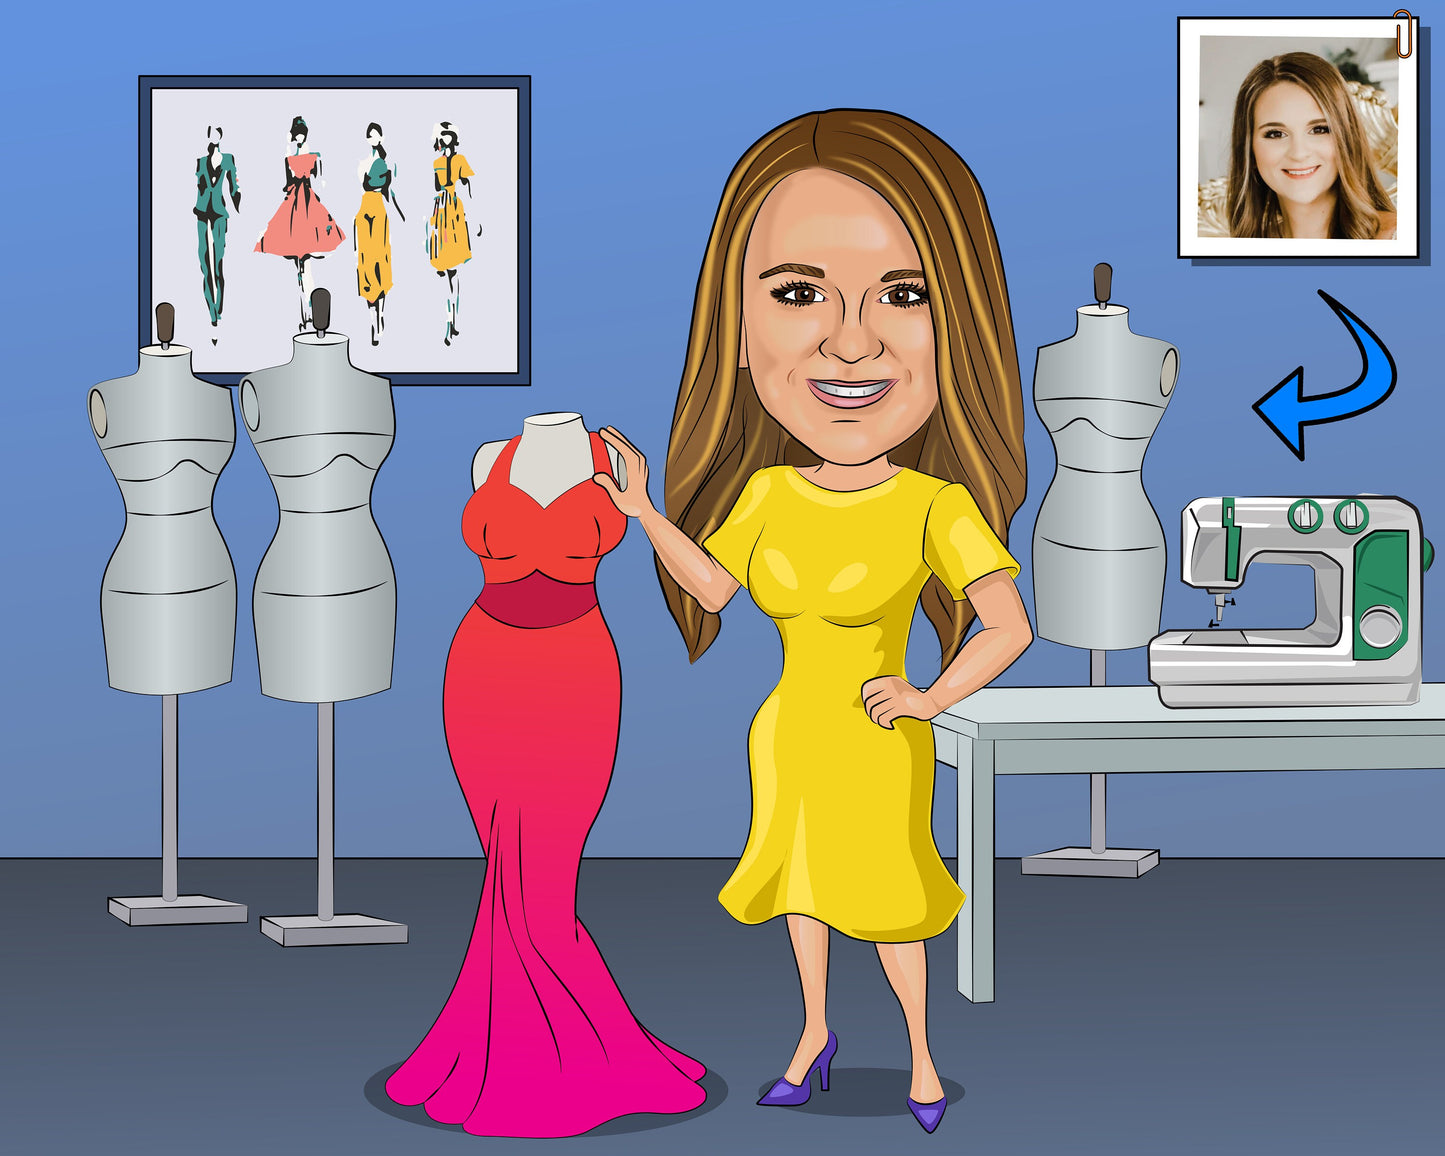 Fashion Student Gift - Custom Caricature From Photo, dress maker gift, seamstress gift